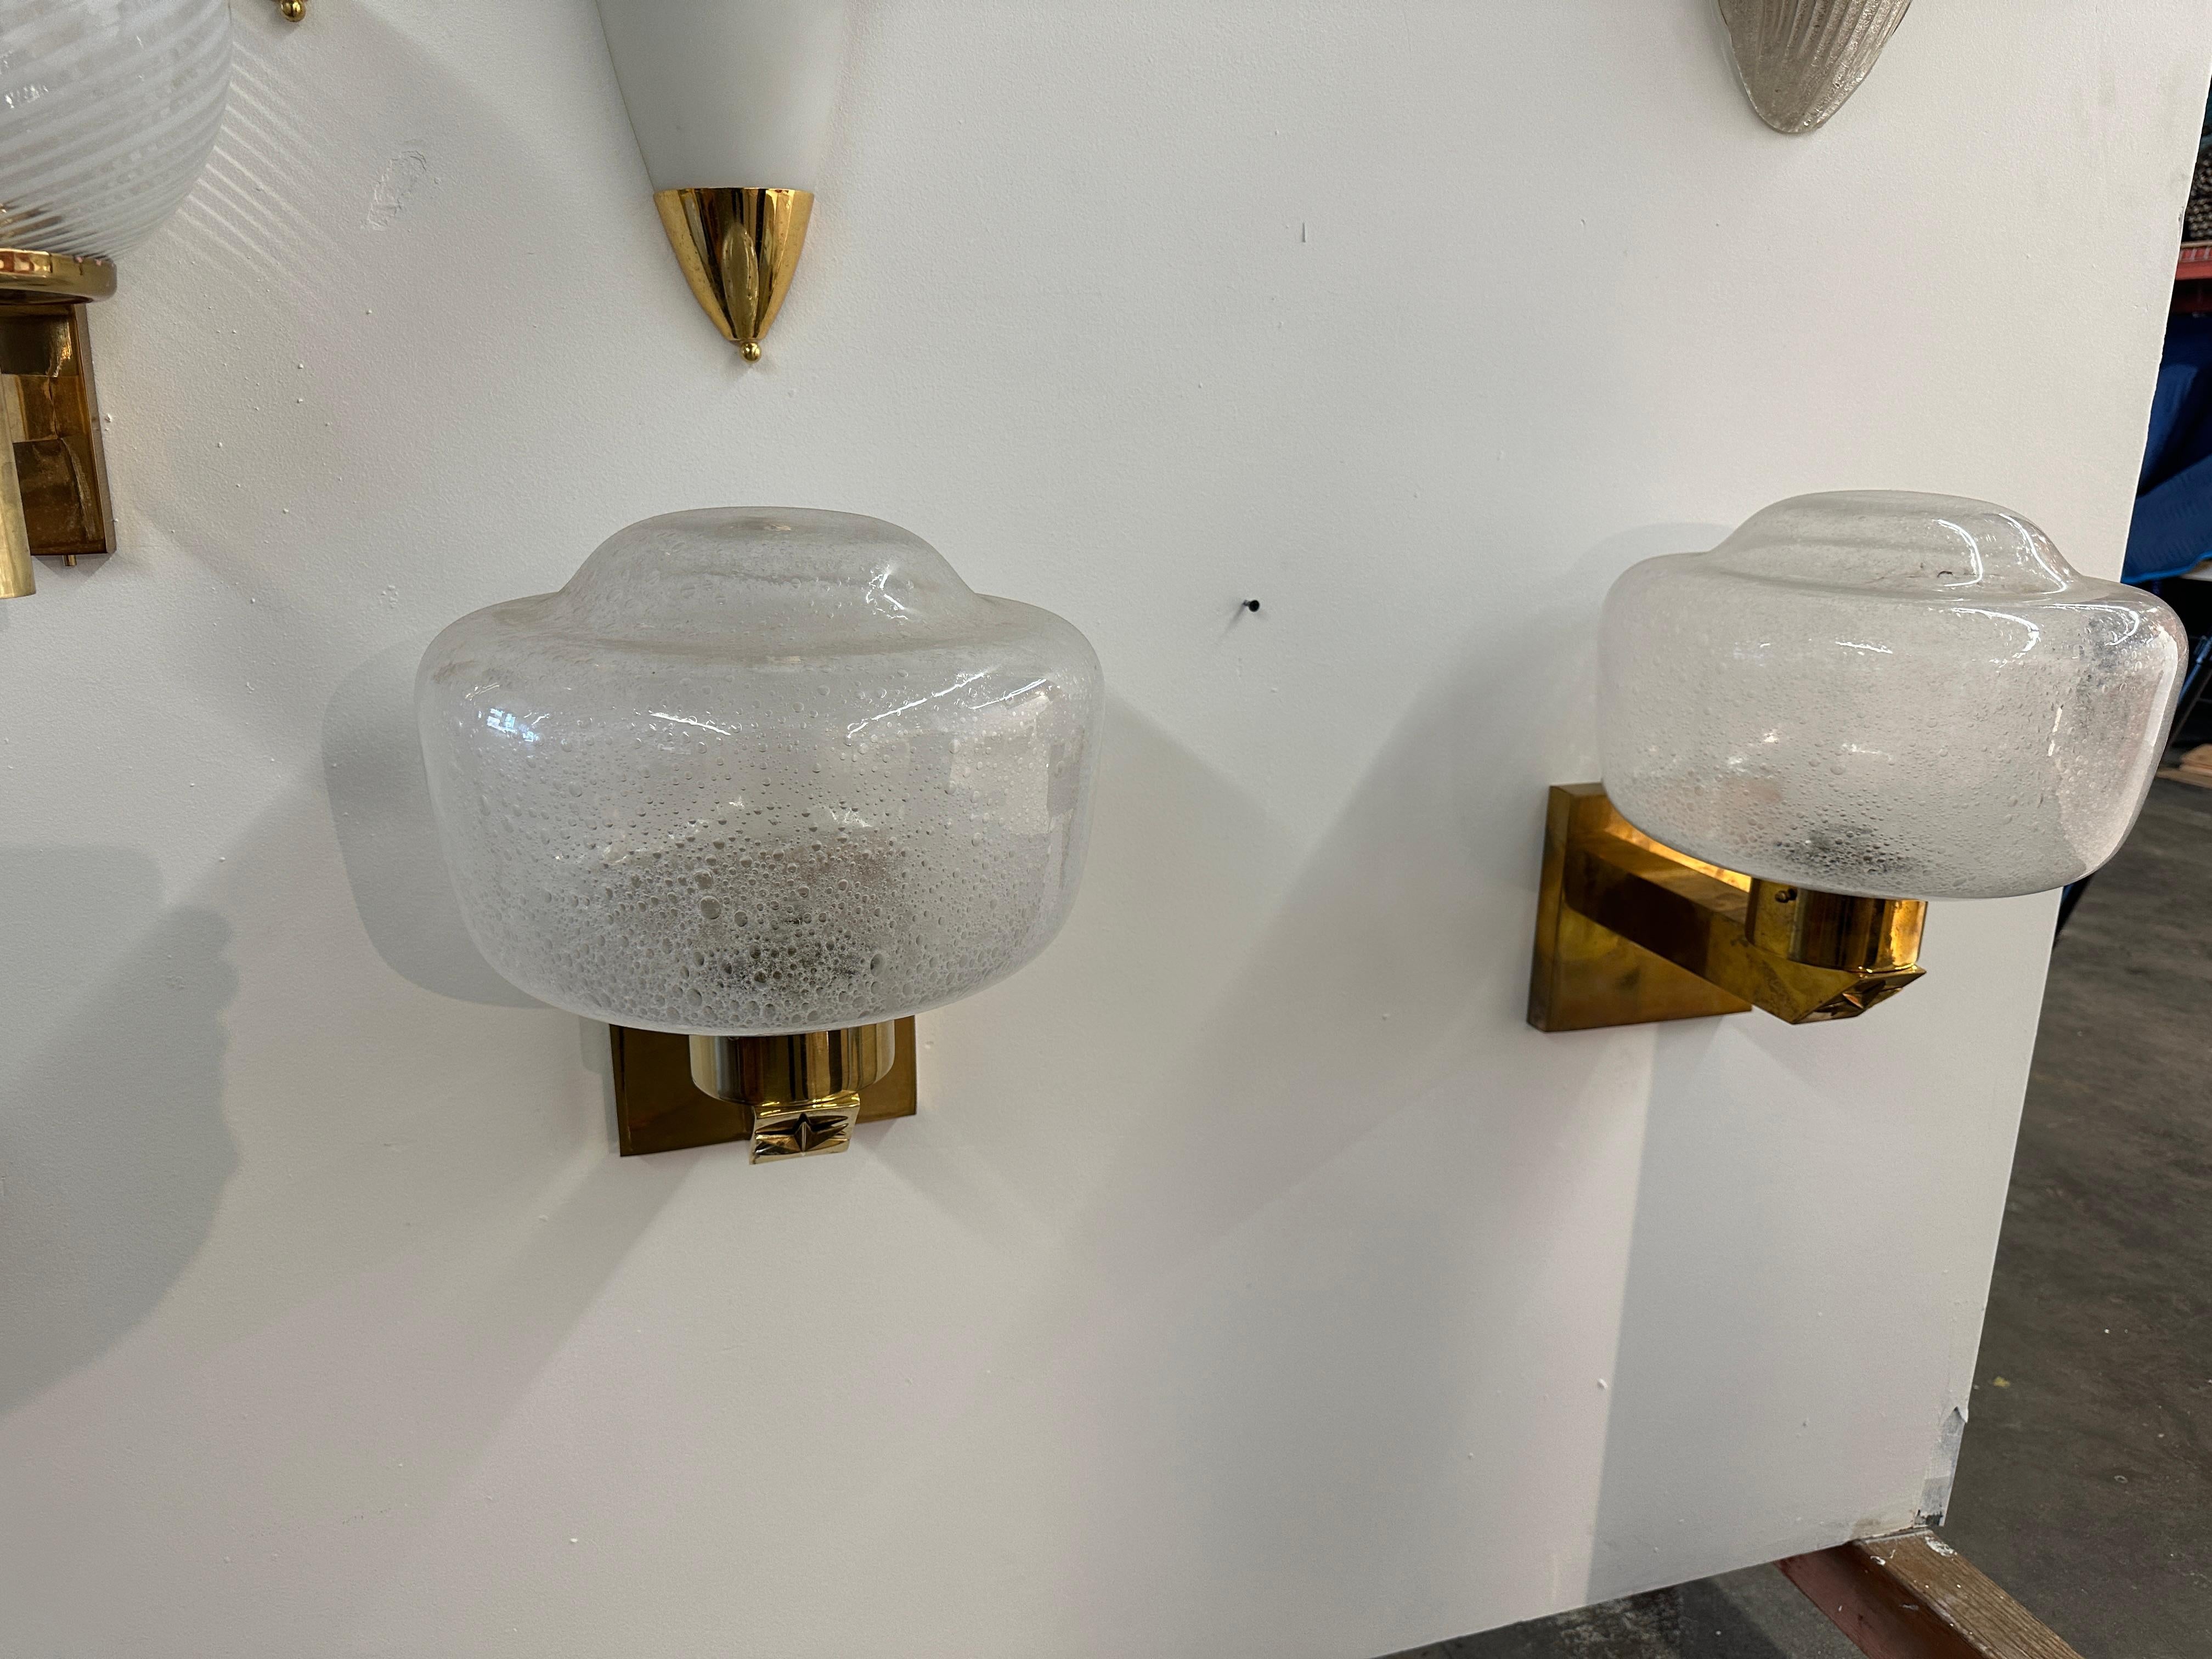 The Pair of 2 Mid Century Italian Wall Sconces from the 1970s exude a classic and sophisticated design. Featuring a brass frame, these wall sconces showcase the enduring charm of mid-century aesthetics. The brass material adds a touch of warmth and